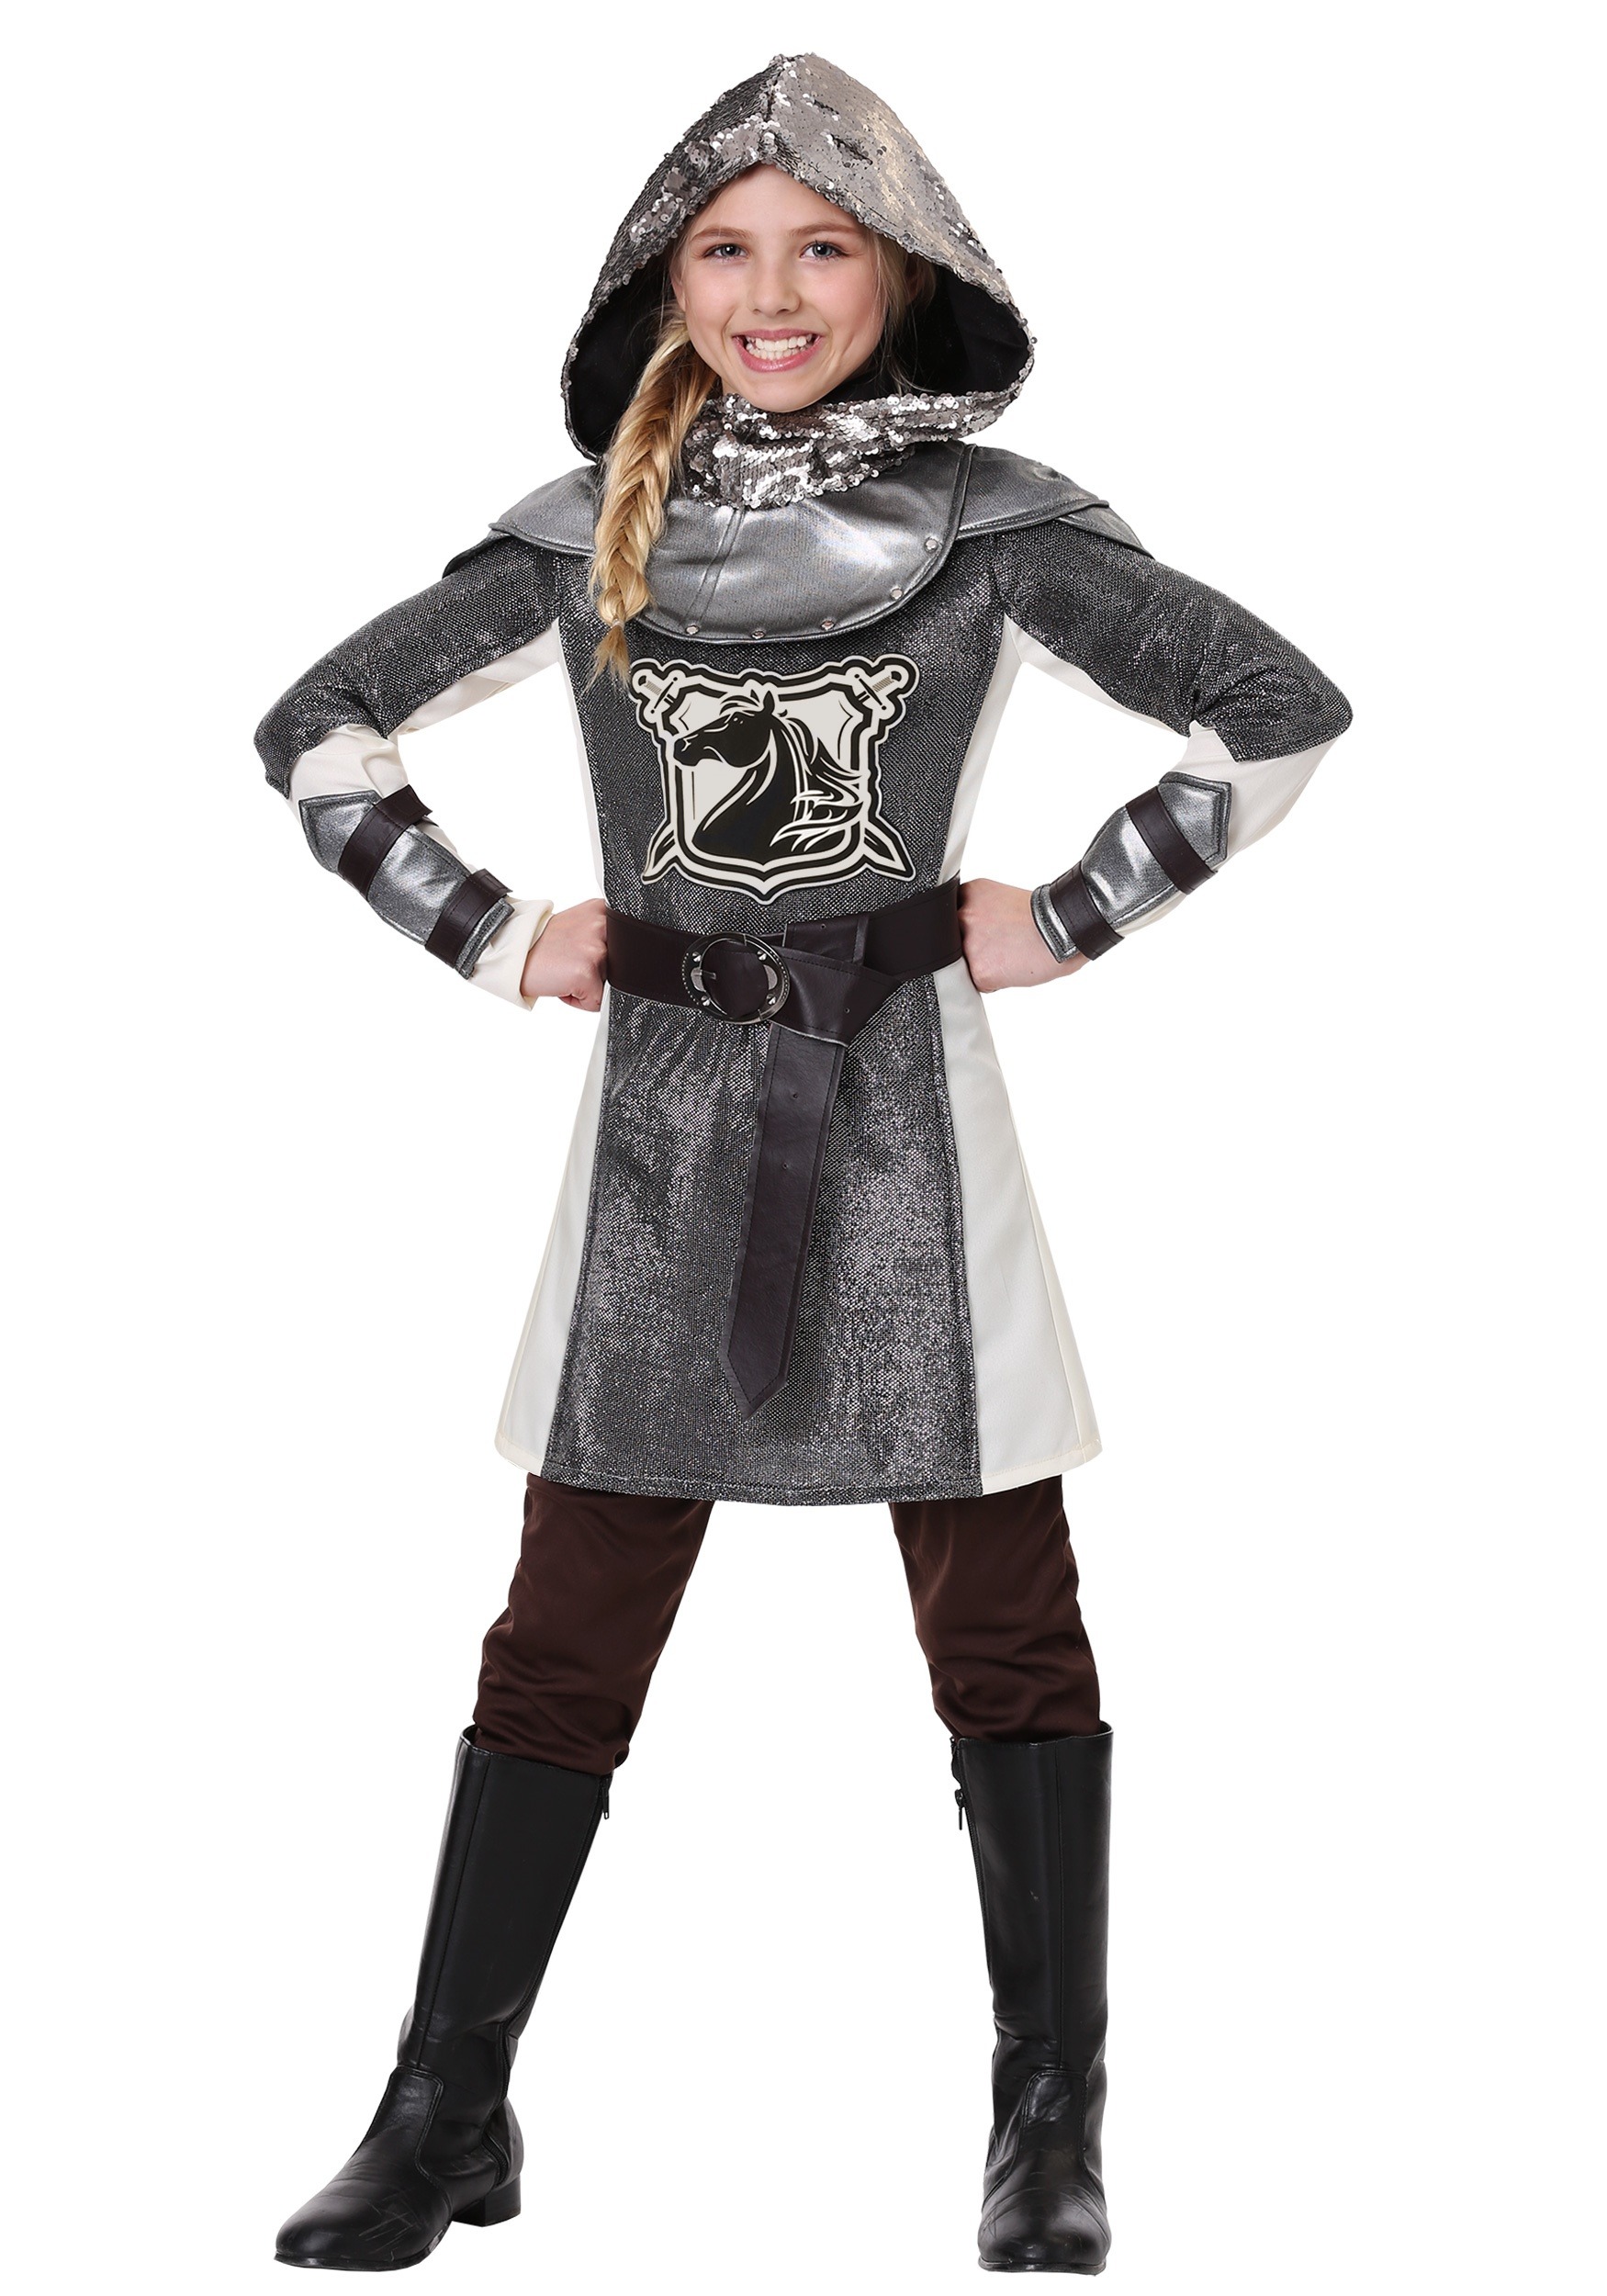 Photos - Fancy Dress Knight FUN Costumes Medieval  Girl's Costume Brown/Gray FUN0410CH 